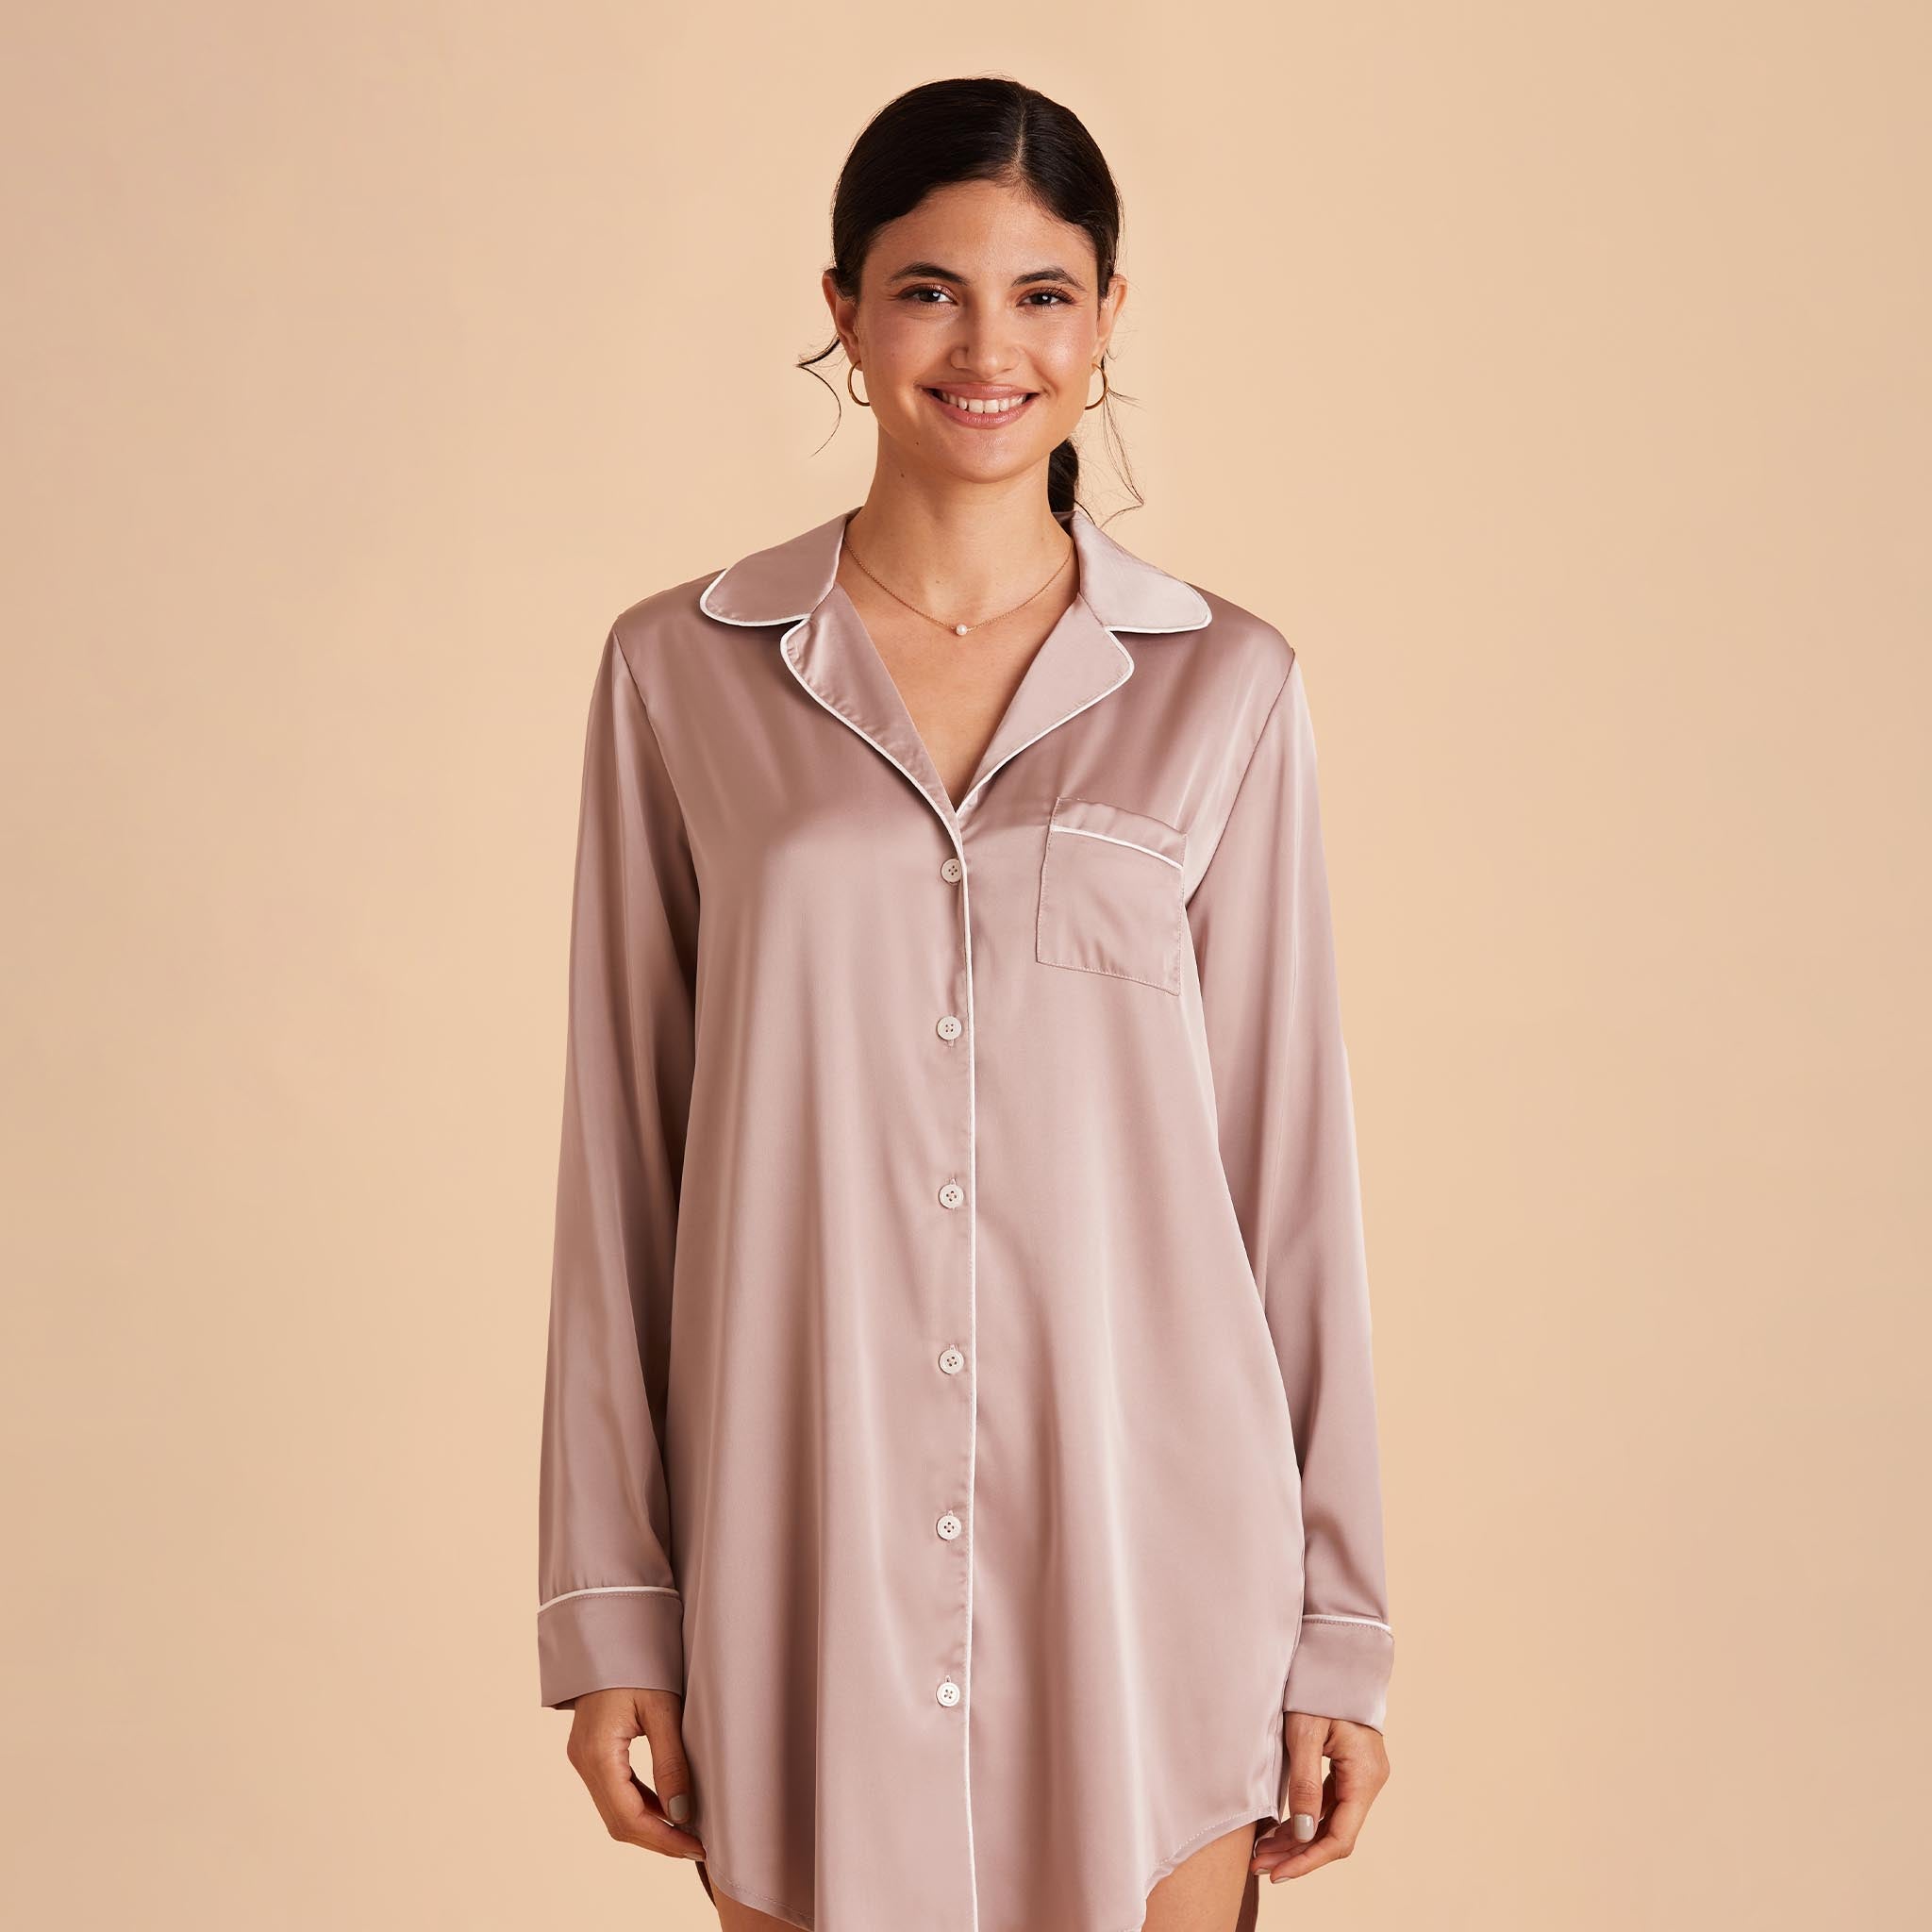 Satin Sleepshirt in mauve taupe by Birdy Grey, front view